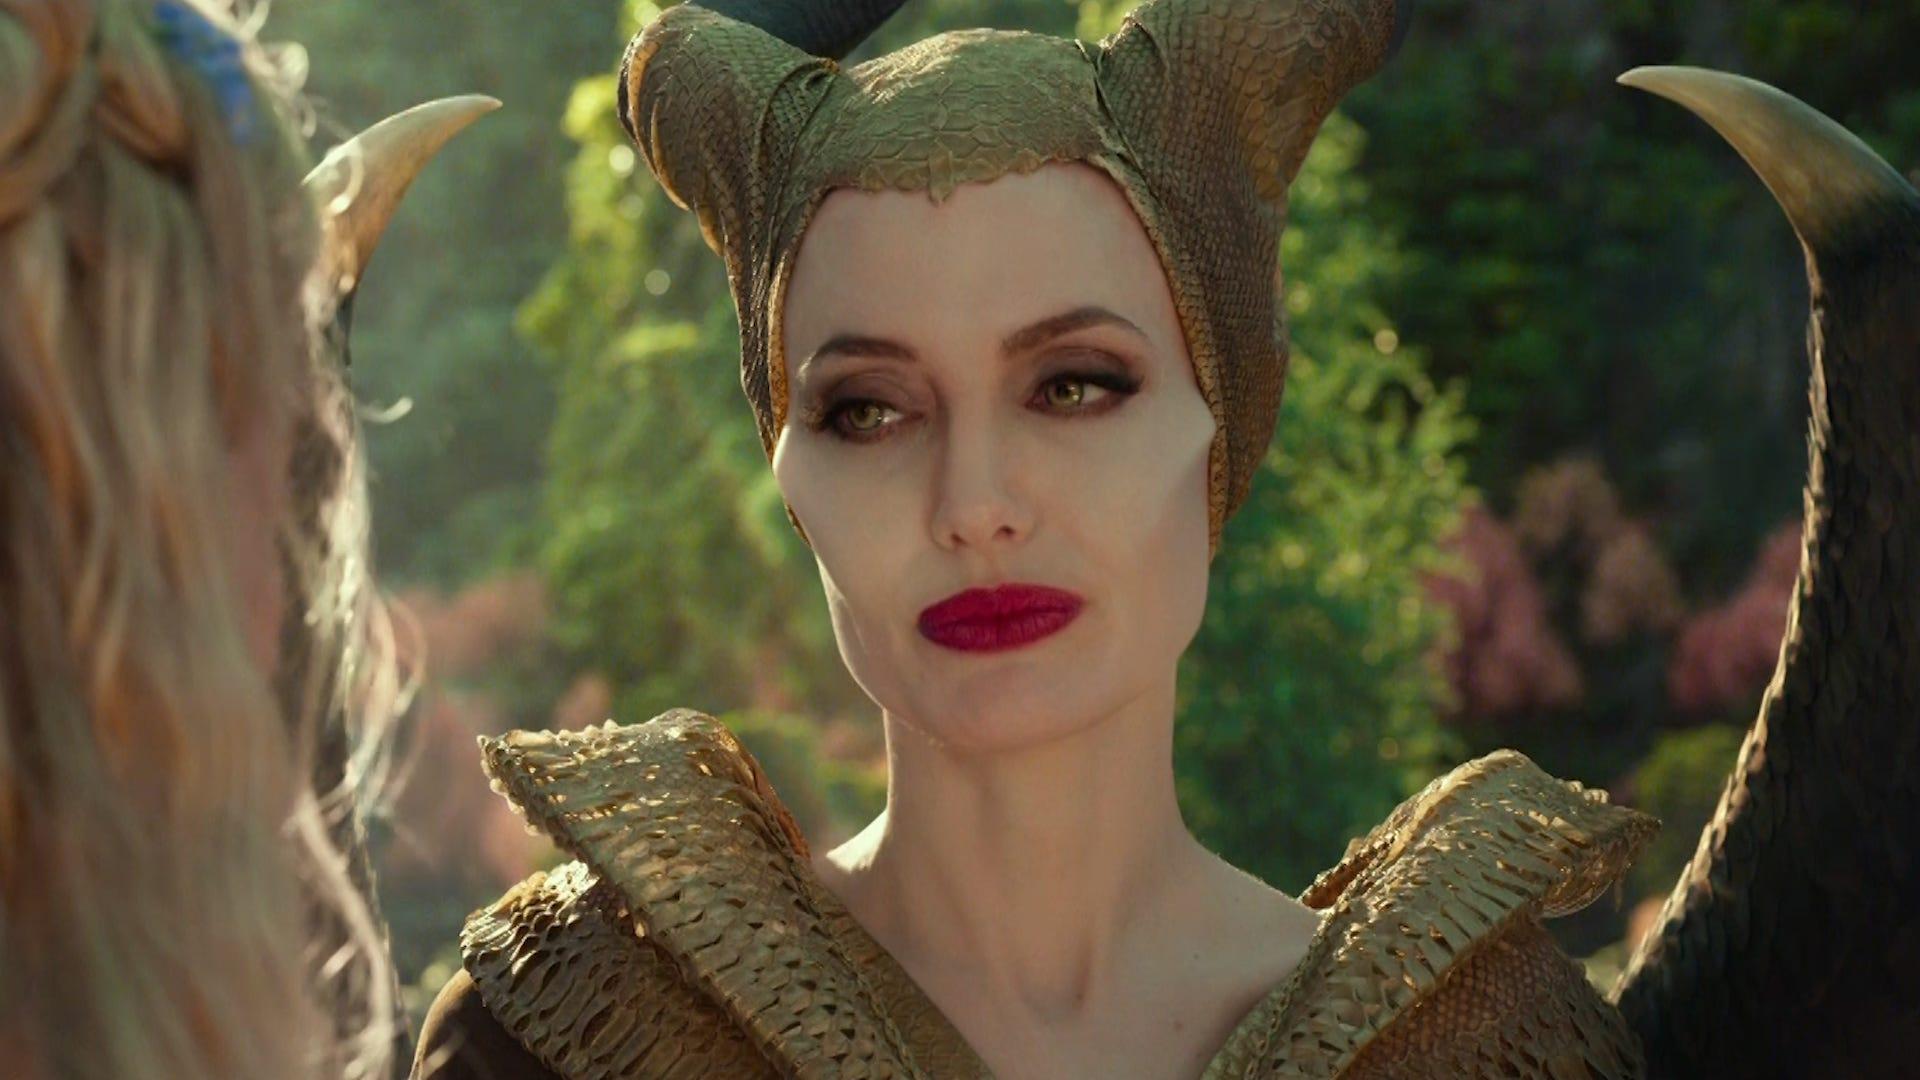 See Disney's first full trailer for 'Maleficent: Mistress of Evil' starring Angelina Jolie